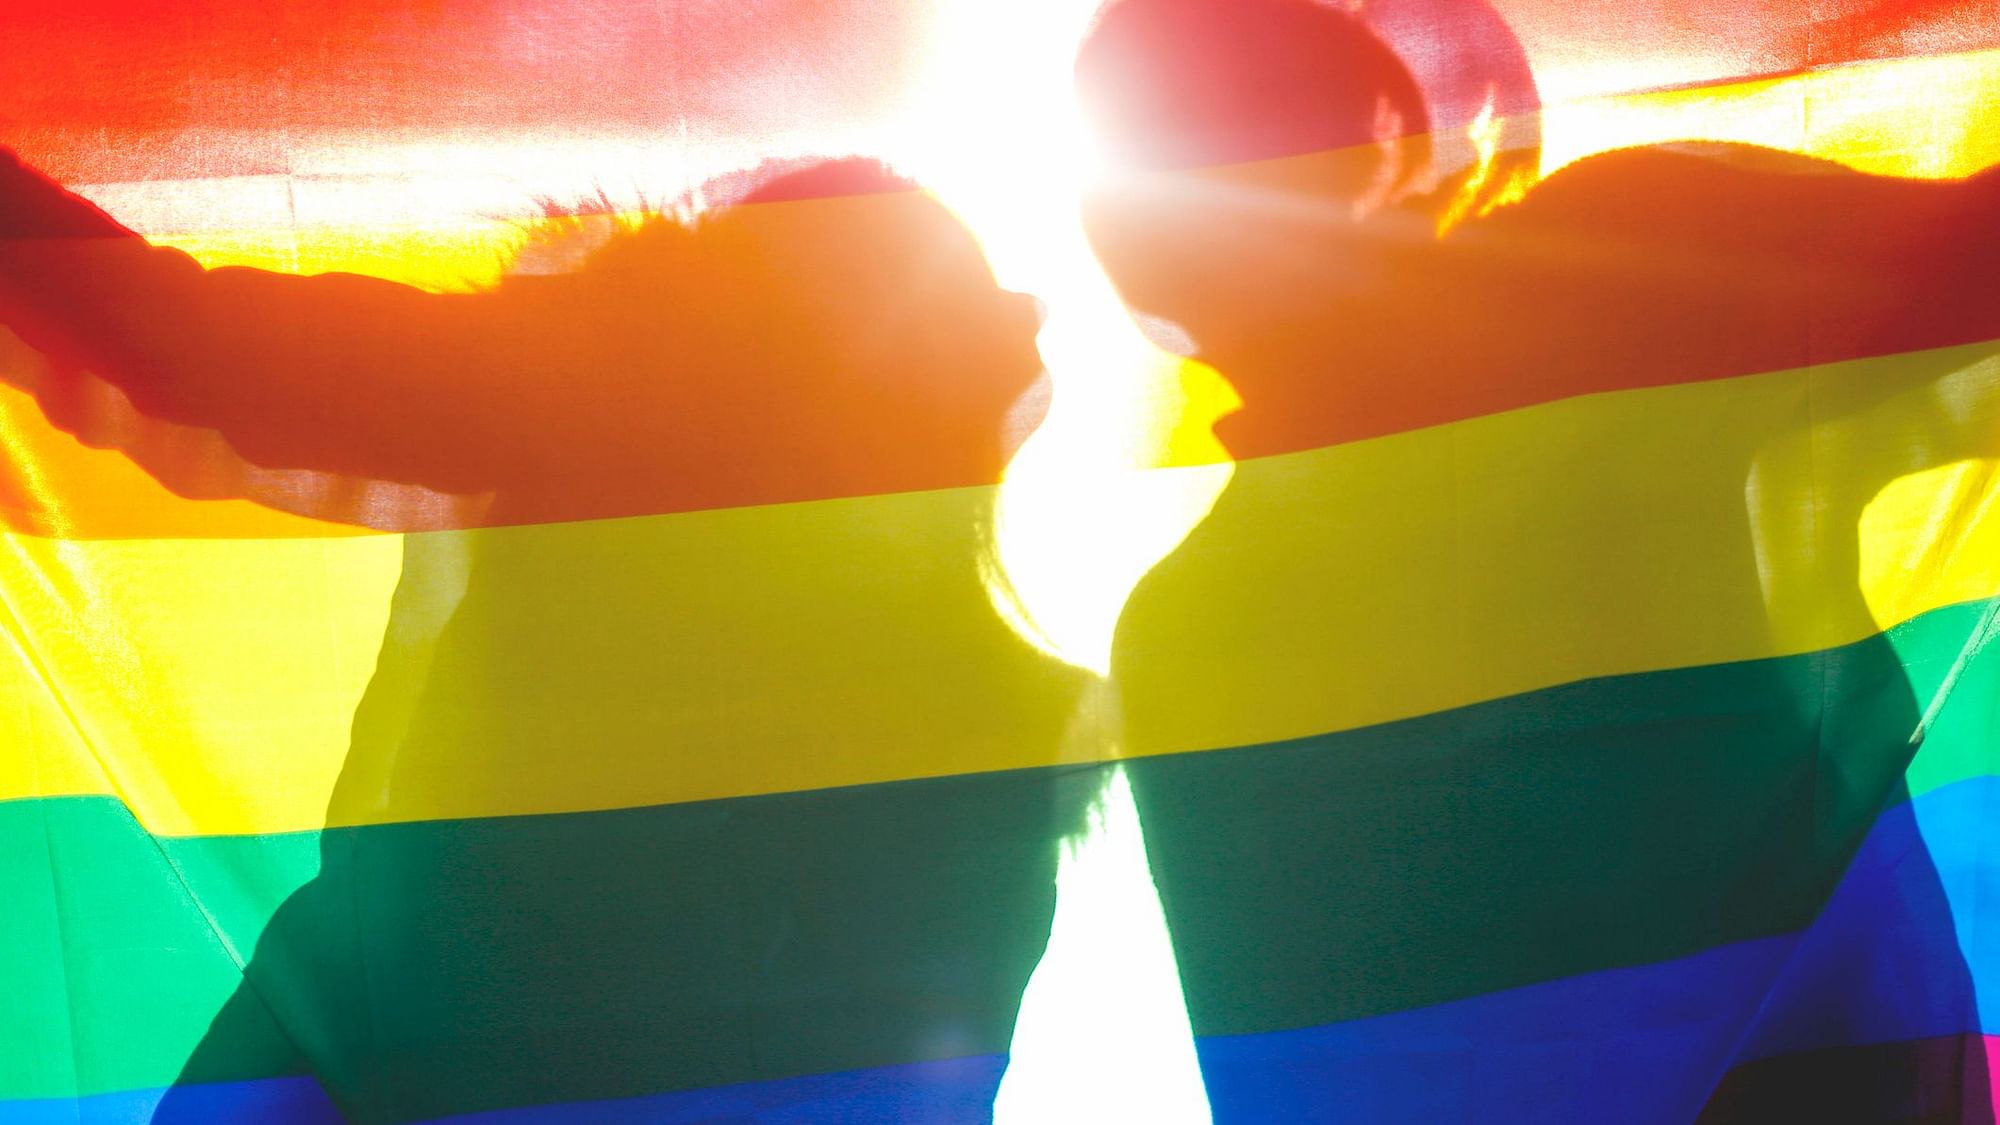 Did you know India’s perception is changing towards gay and lesbian?